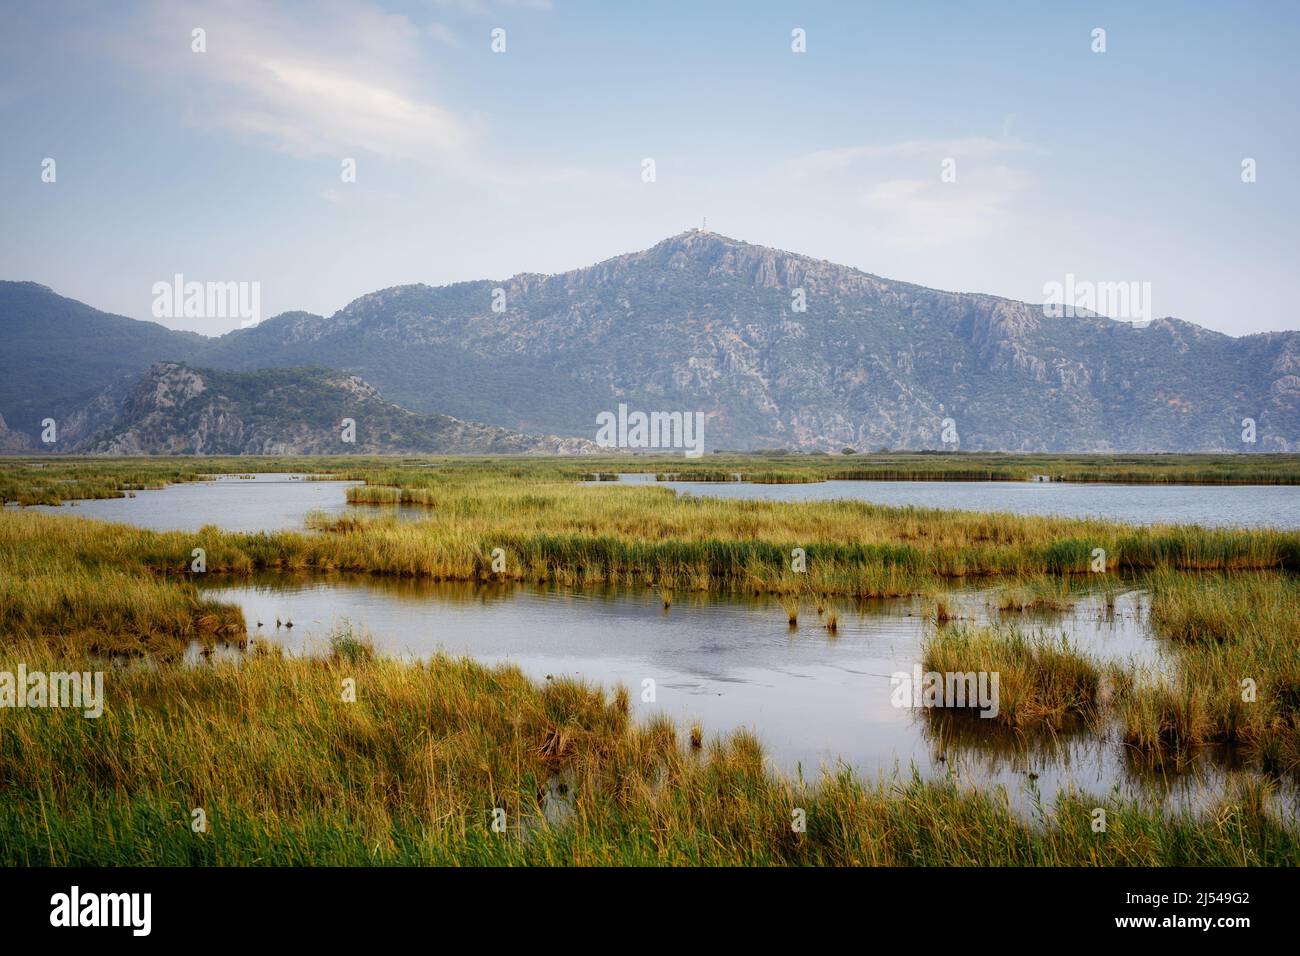 Dalyan canal and Sulungur lake view, Turkey Stock Photo